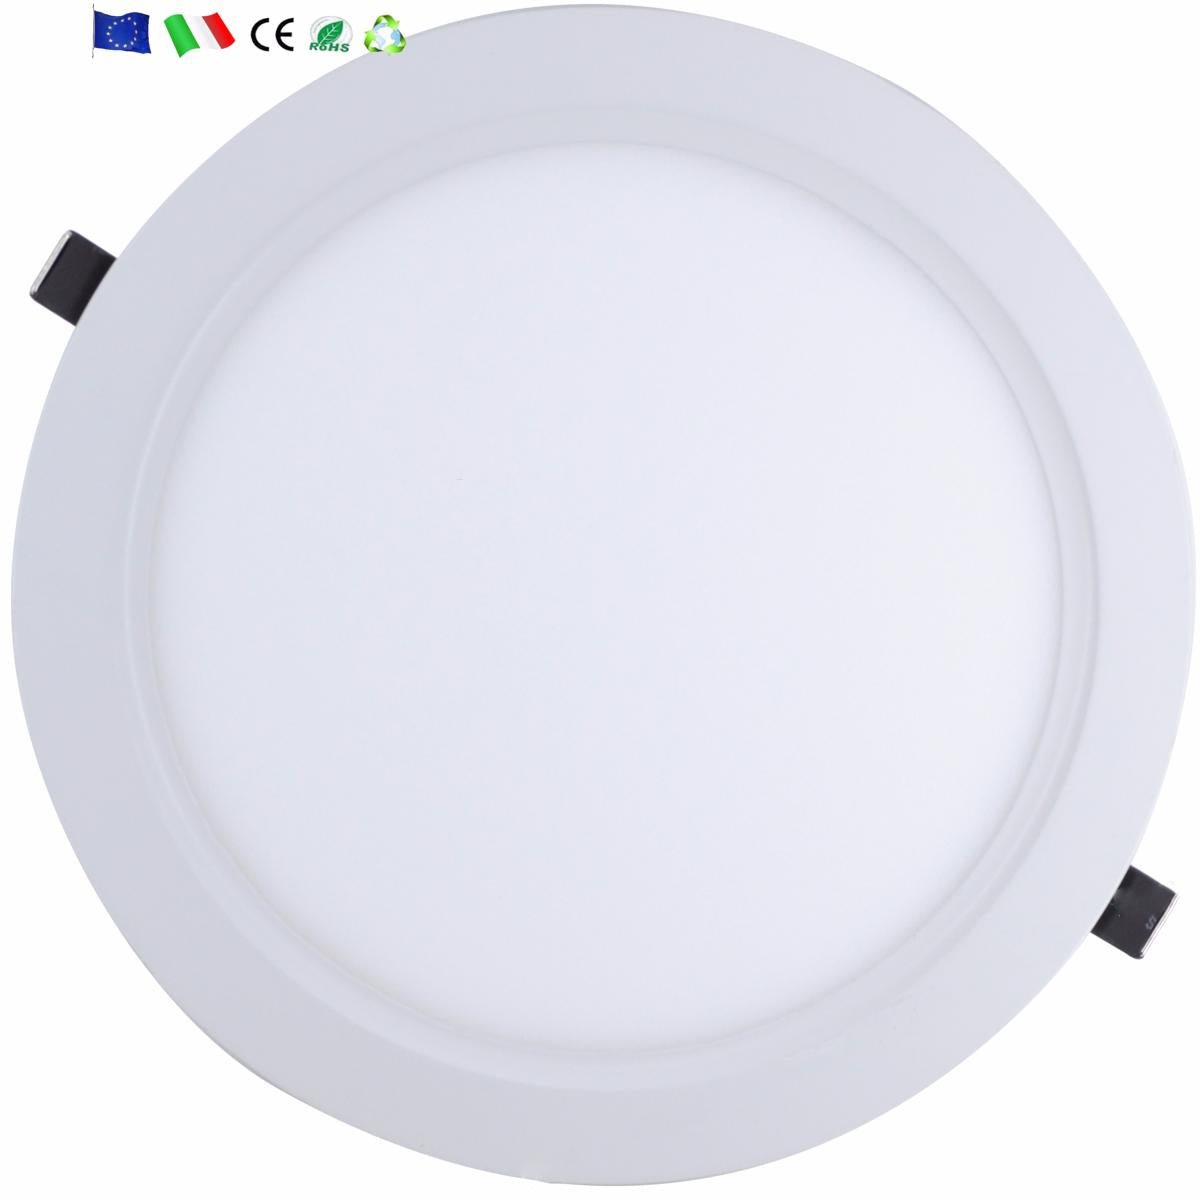 Spot LED Extra Plat Rond 24W Blanc - Silamp France